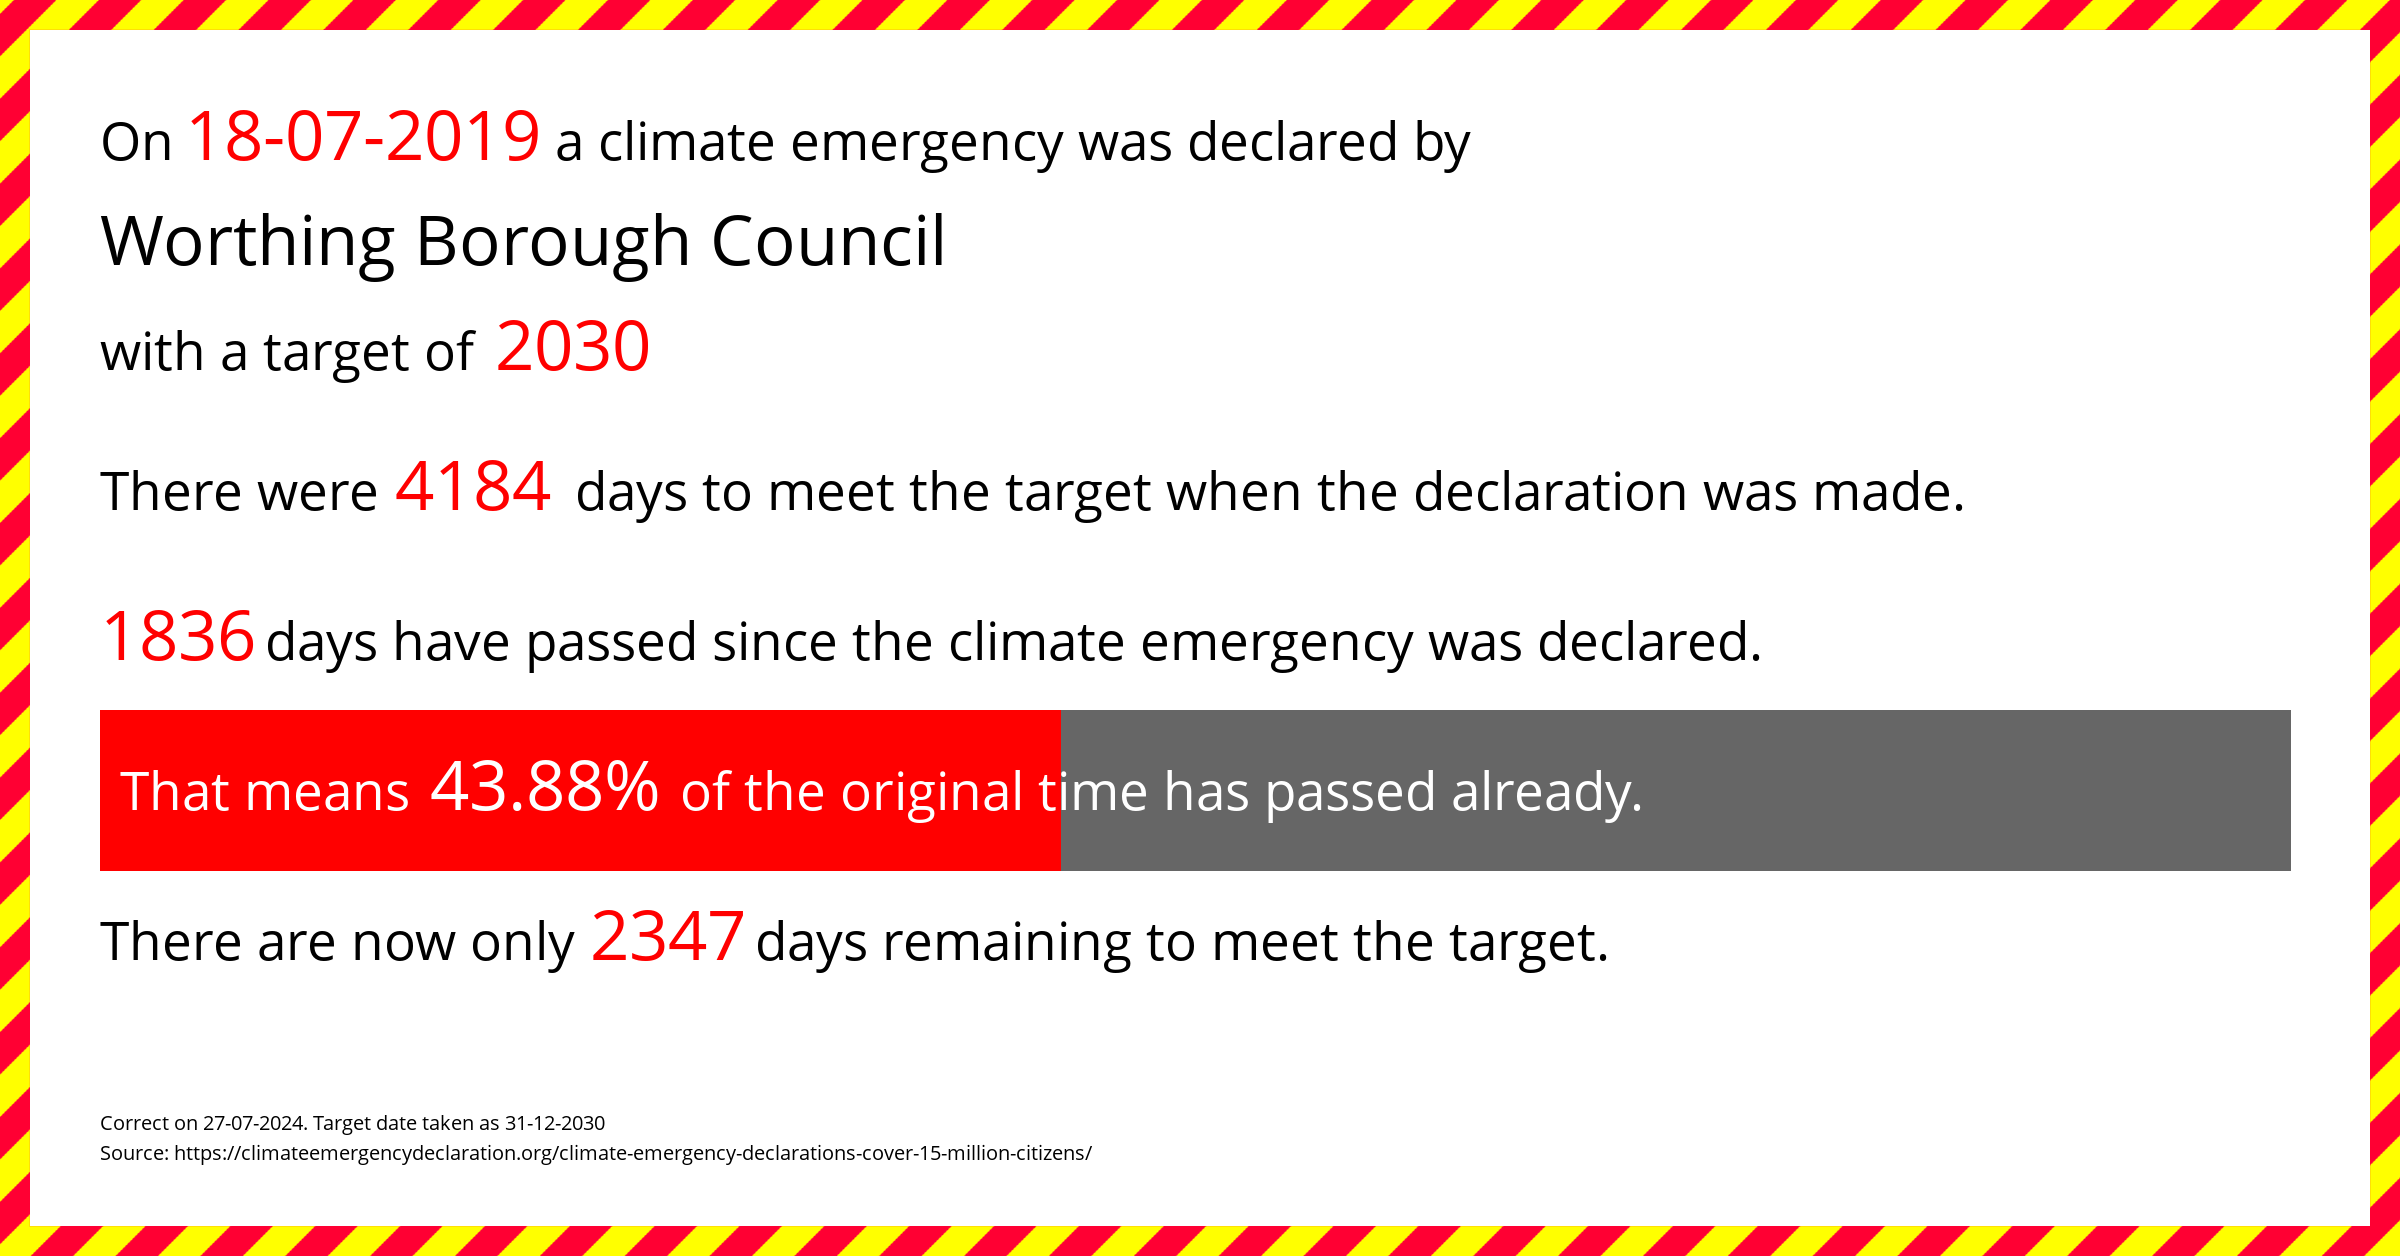 Worthing Borough Council  declared a Climate emergency on Thursday 18th July 2019, with a target of 2030.